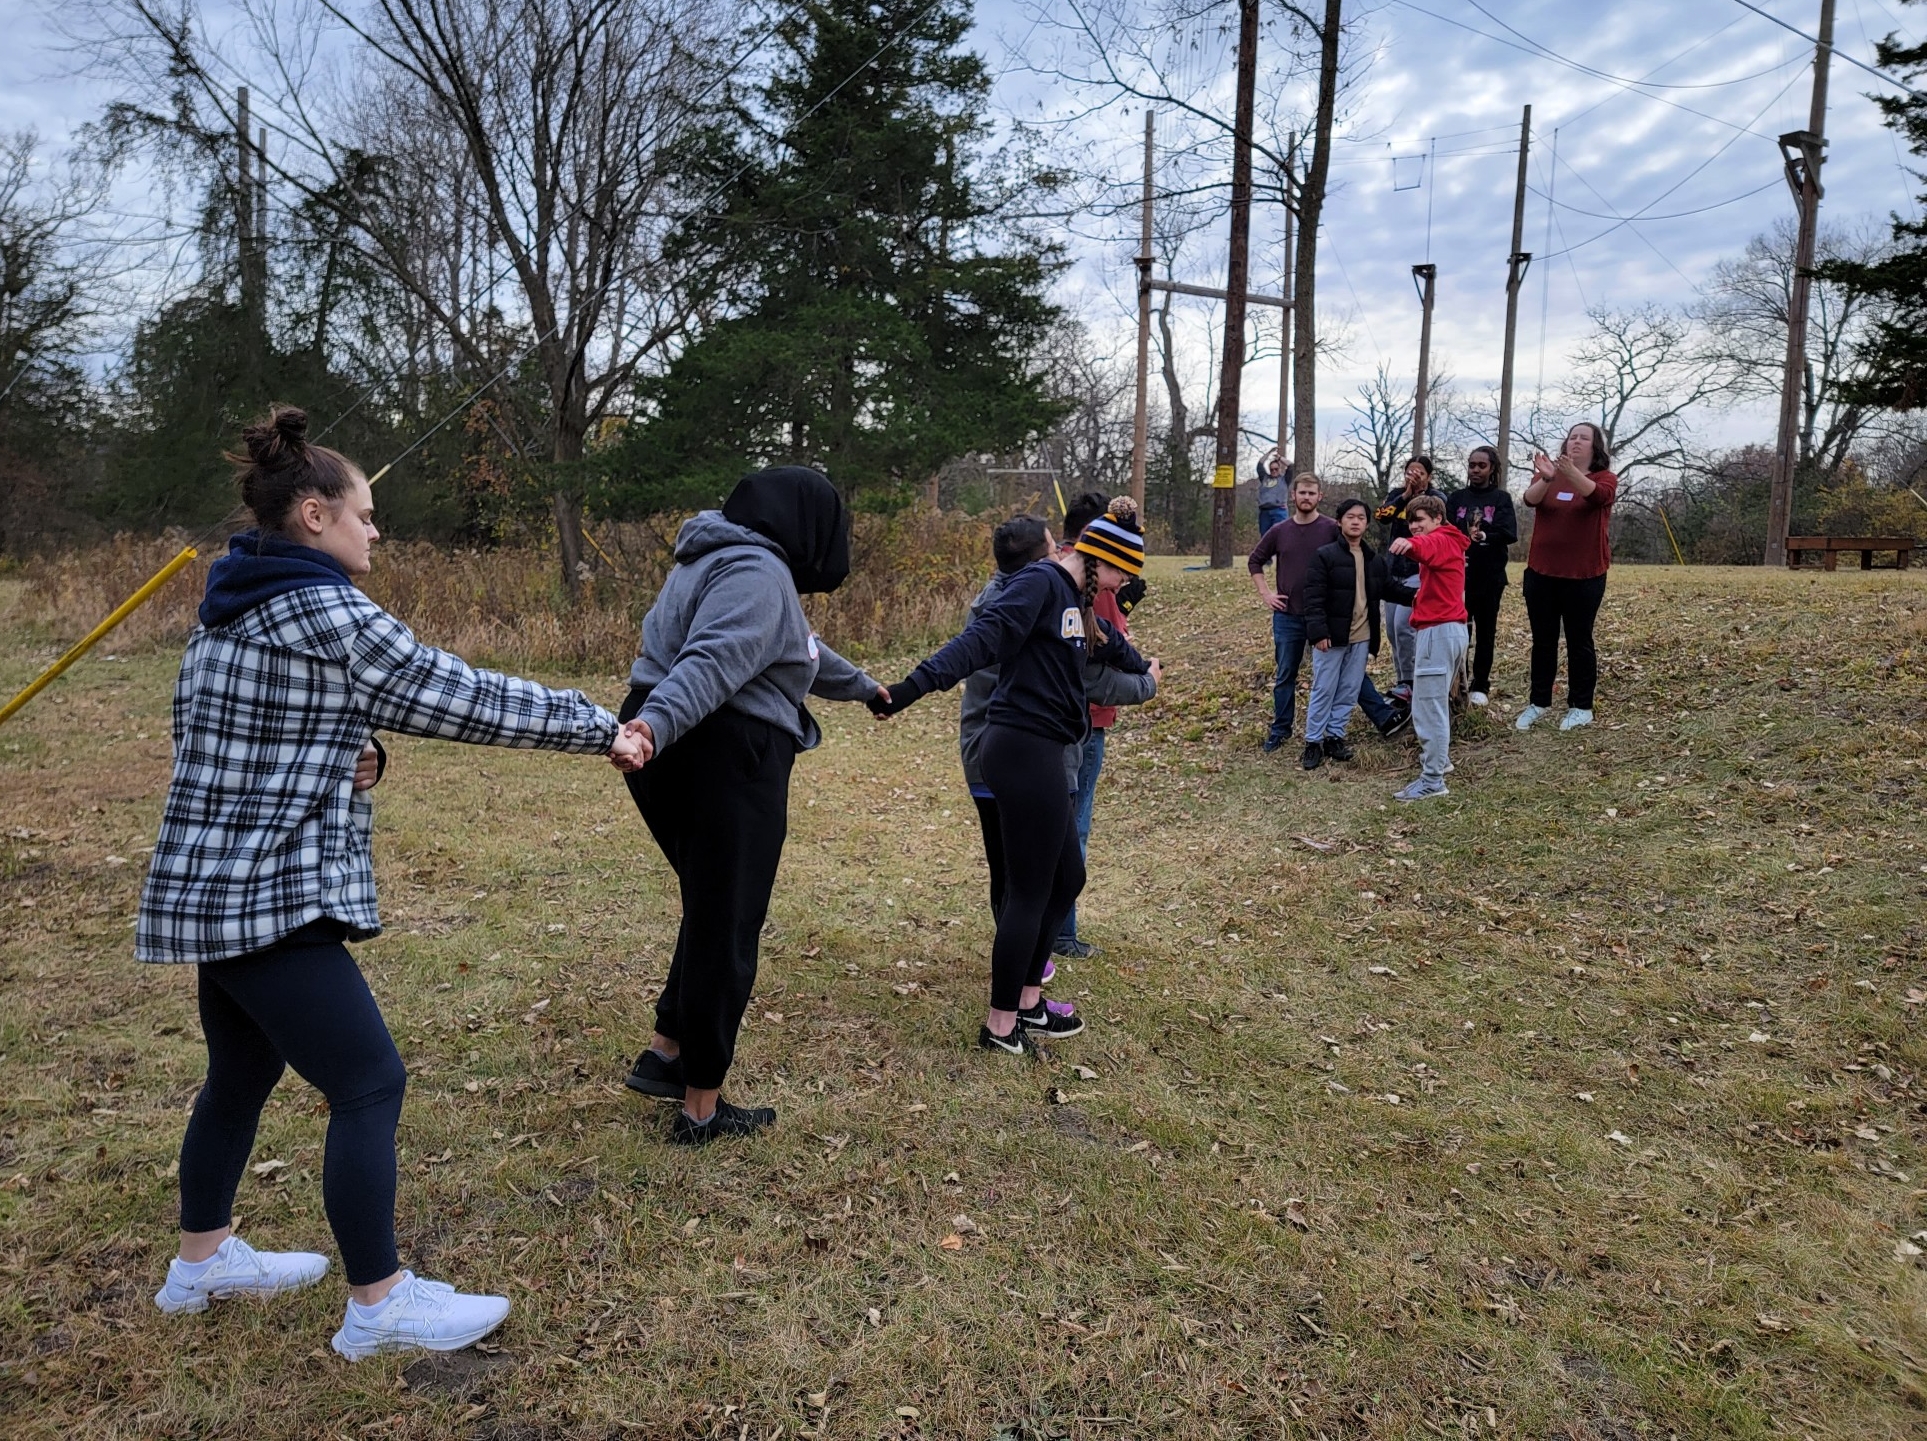 students participating in a team building exercise outside